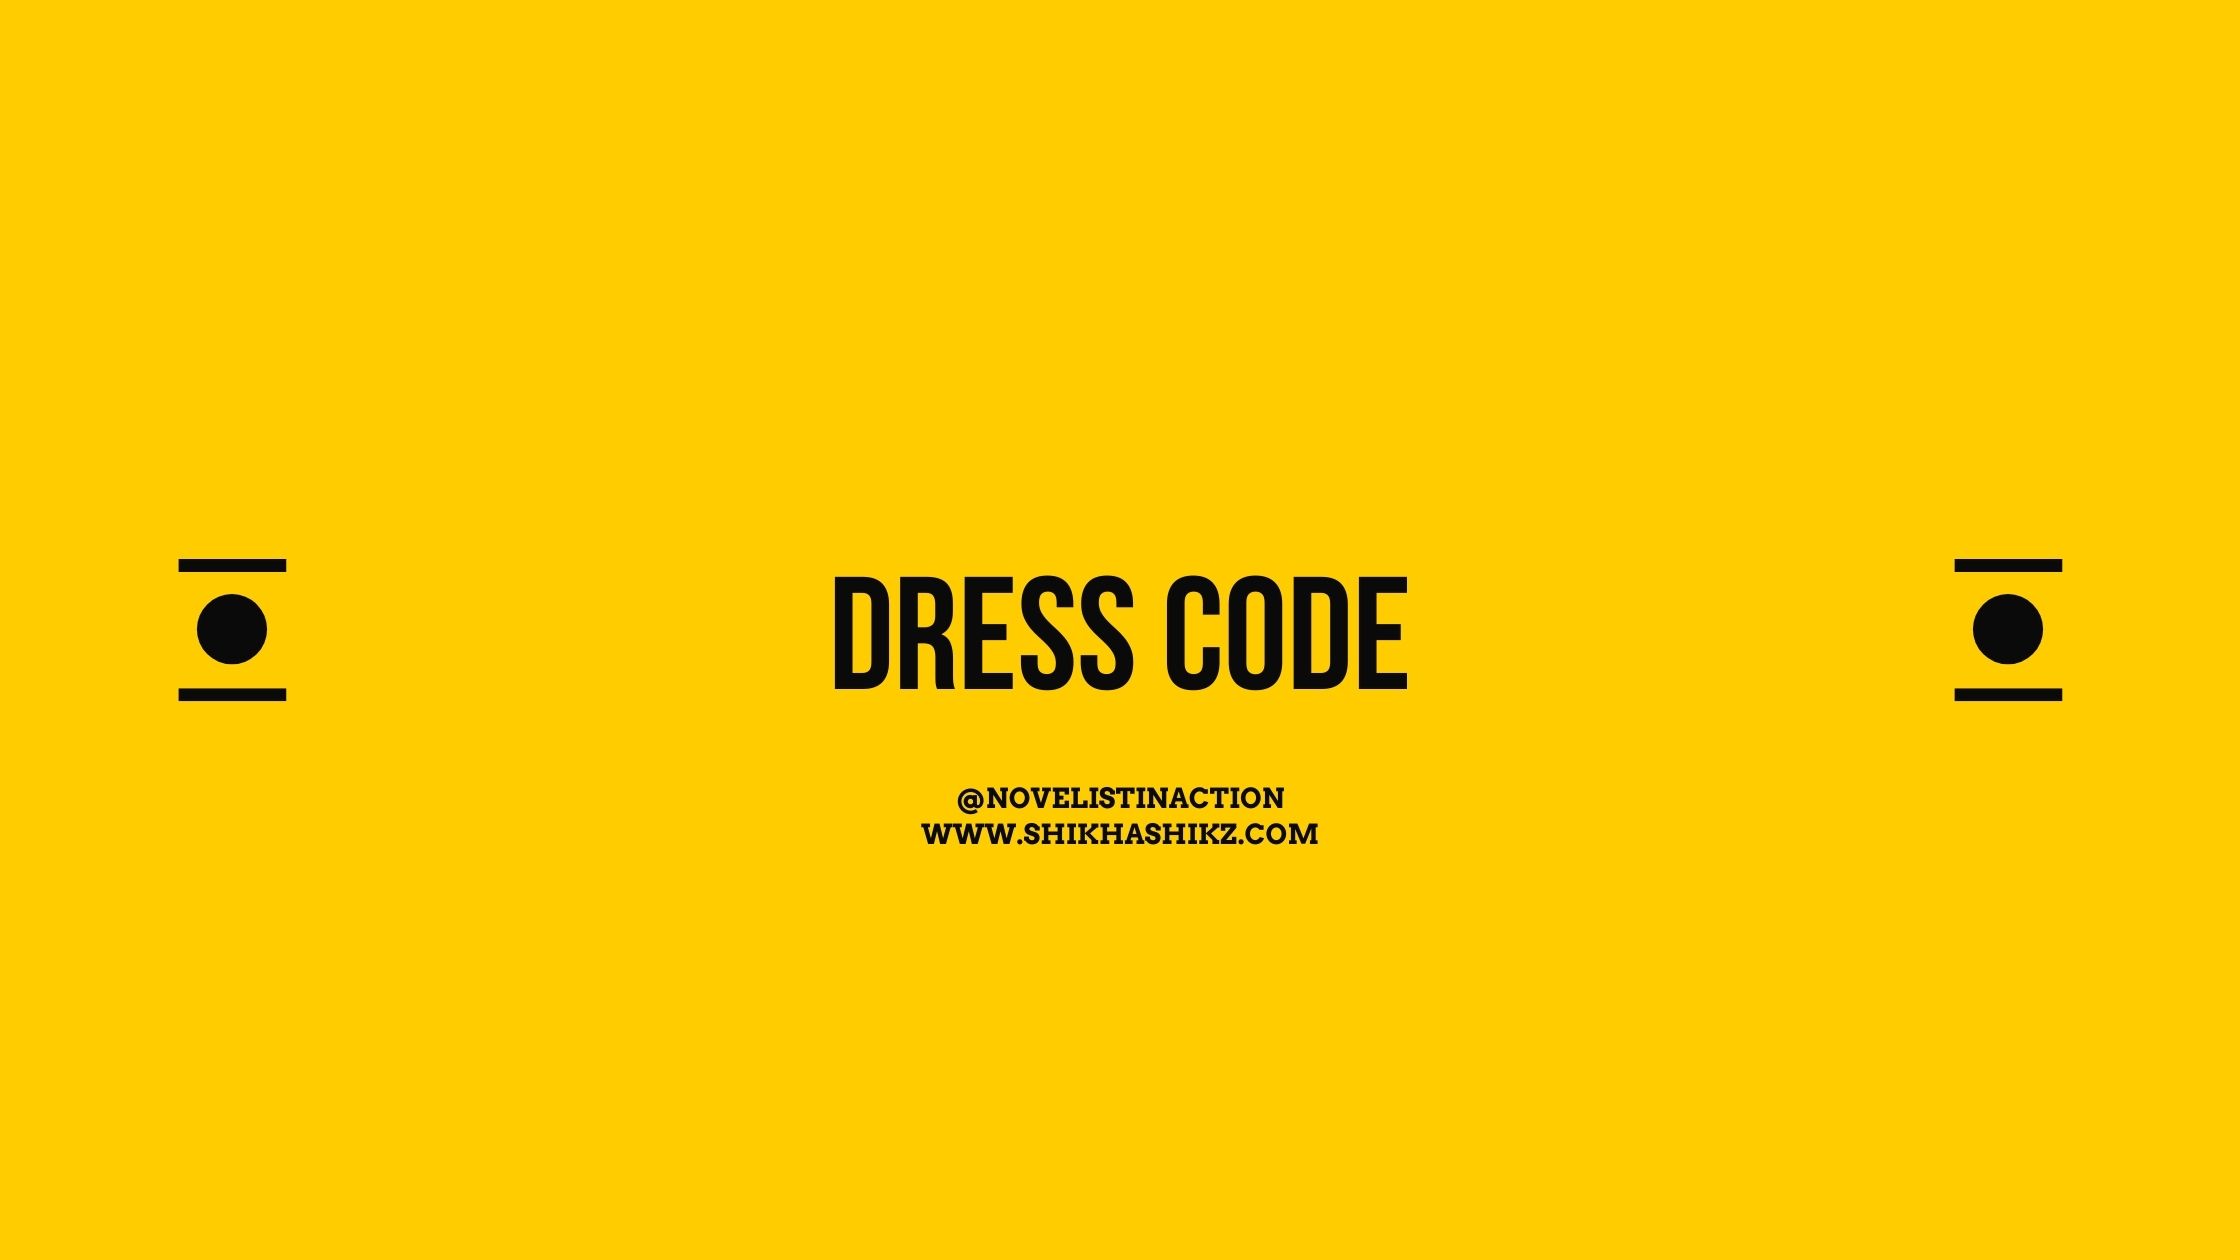 Whats your Dress Code?